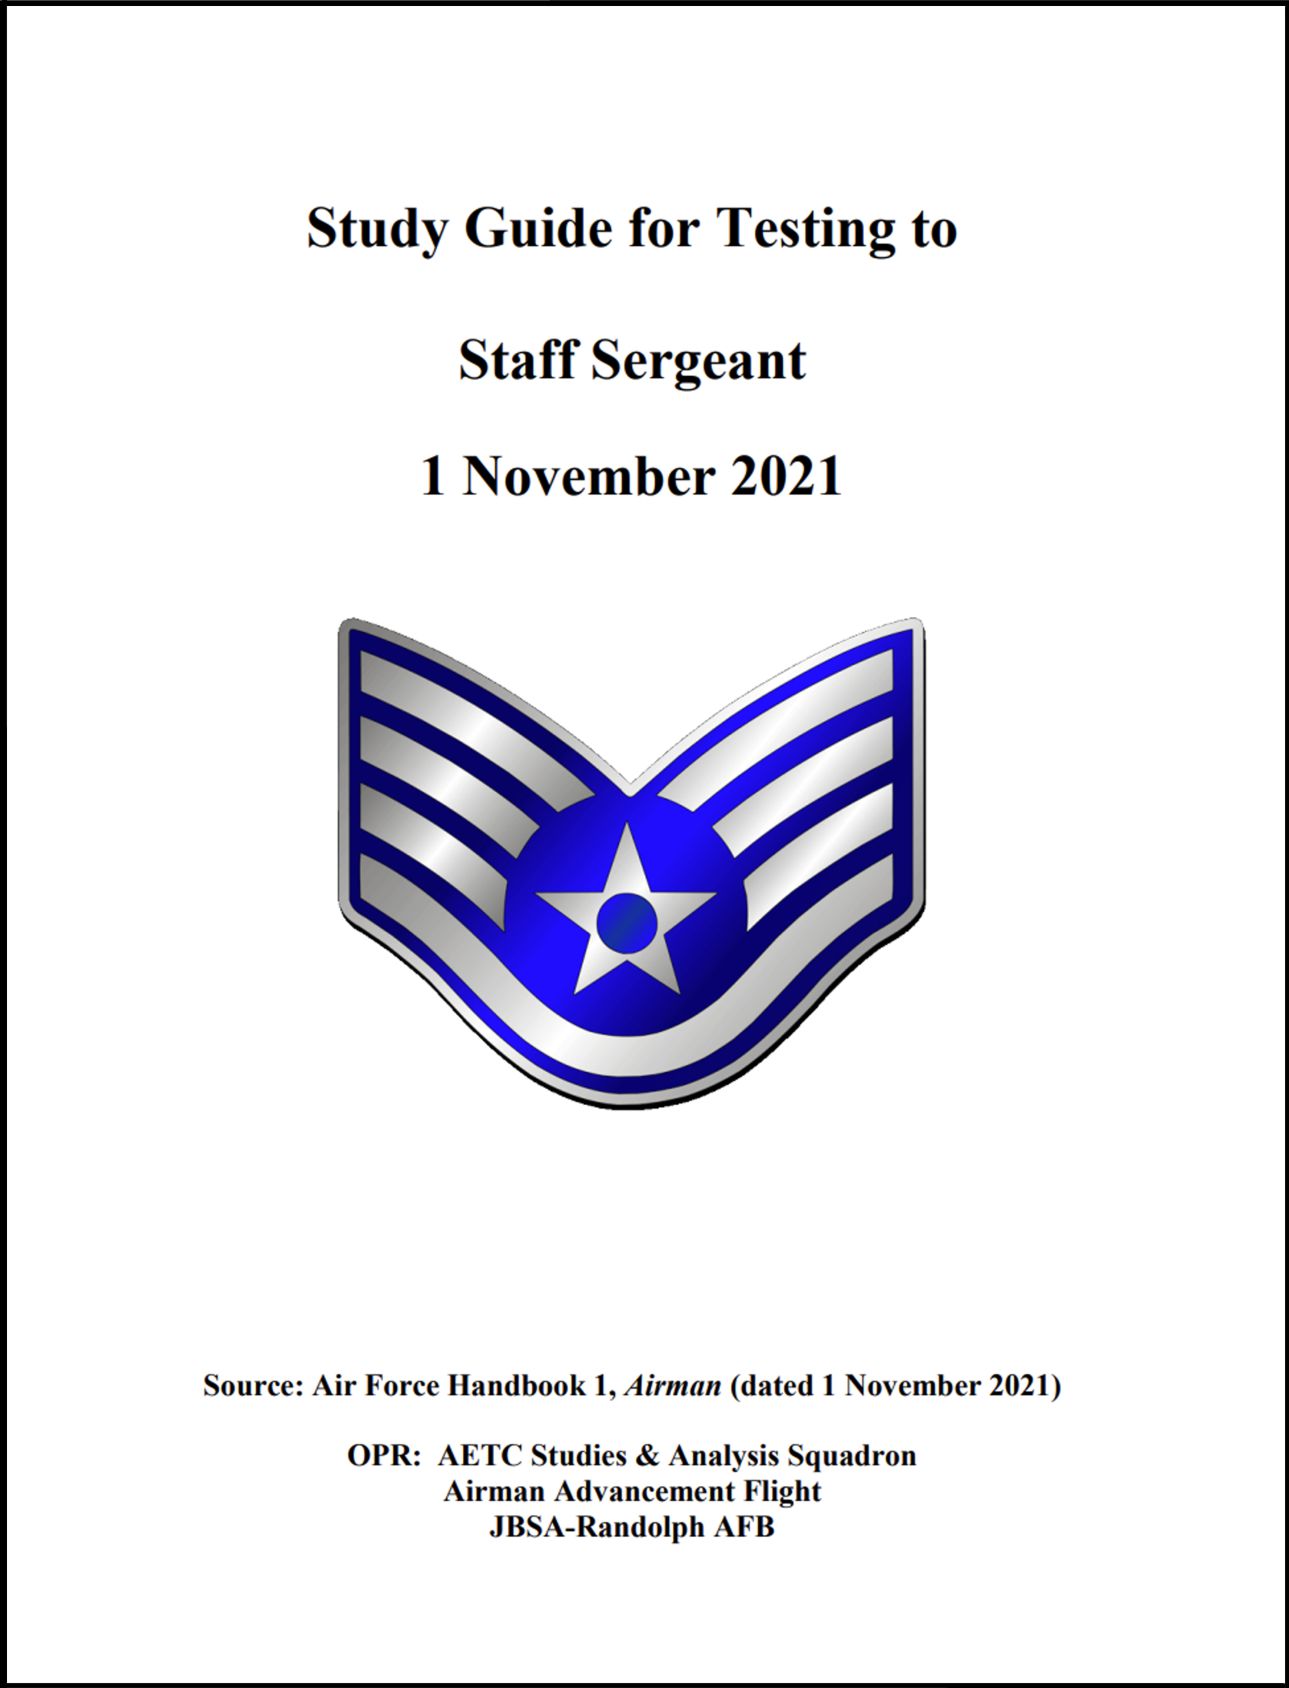 Study Guide for Testing to Staff Sergeant